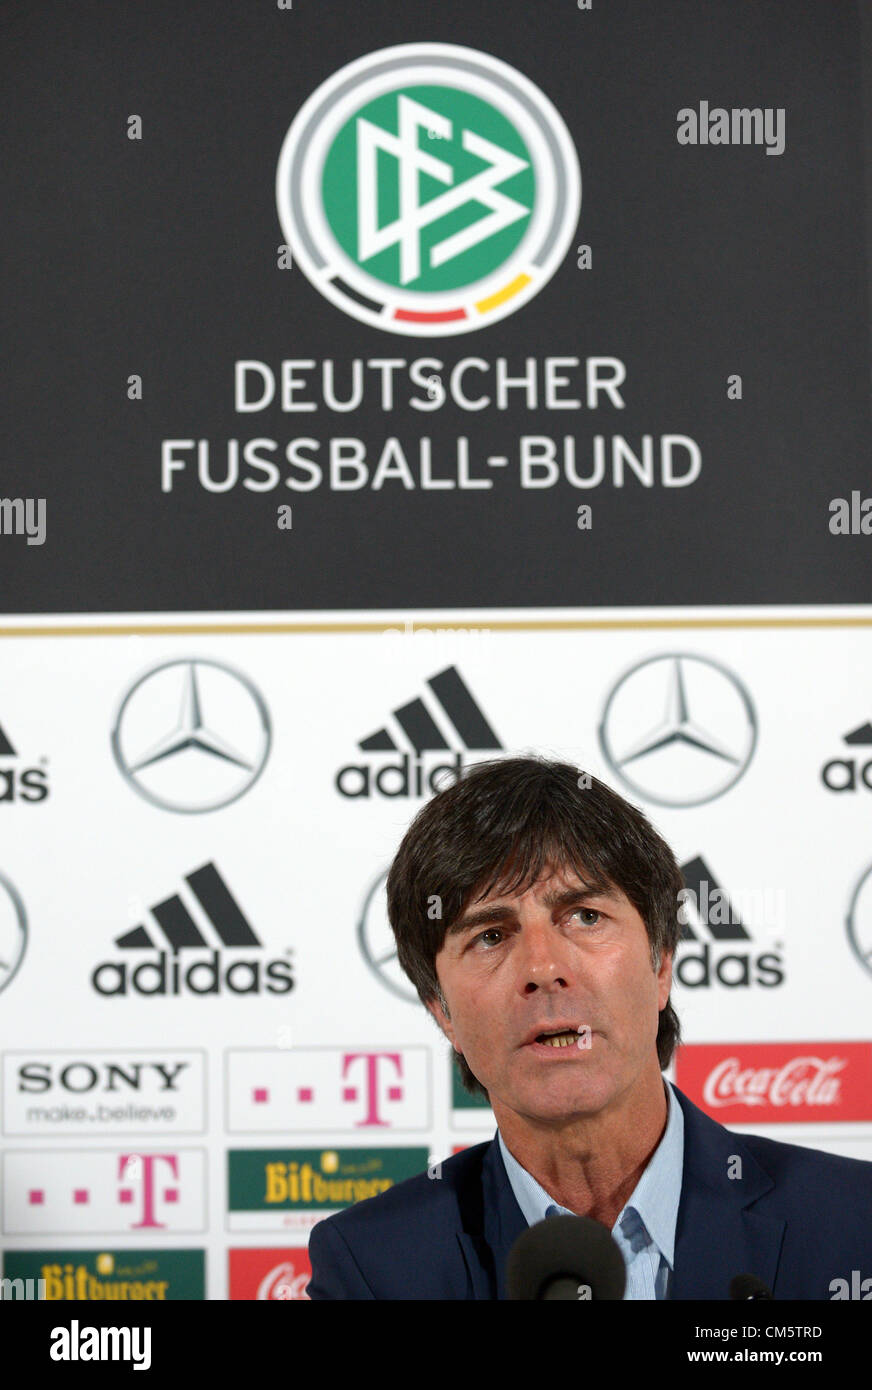 11.10.2012. Aviva Stadium, Dublin, Ireland.  Germany's head coach Joachim Loew takes part in a press conference at Aviva Stadium in Dublin, Ireland, 11 October 2012. The German national team will play a World Cup qualification match against Ireland on 12 October 2012. Stock Photo